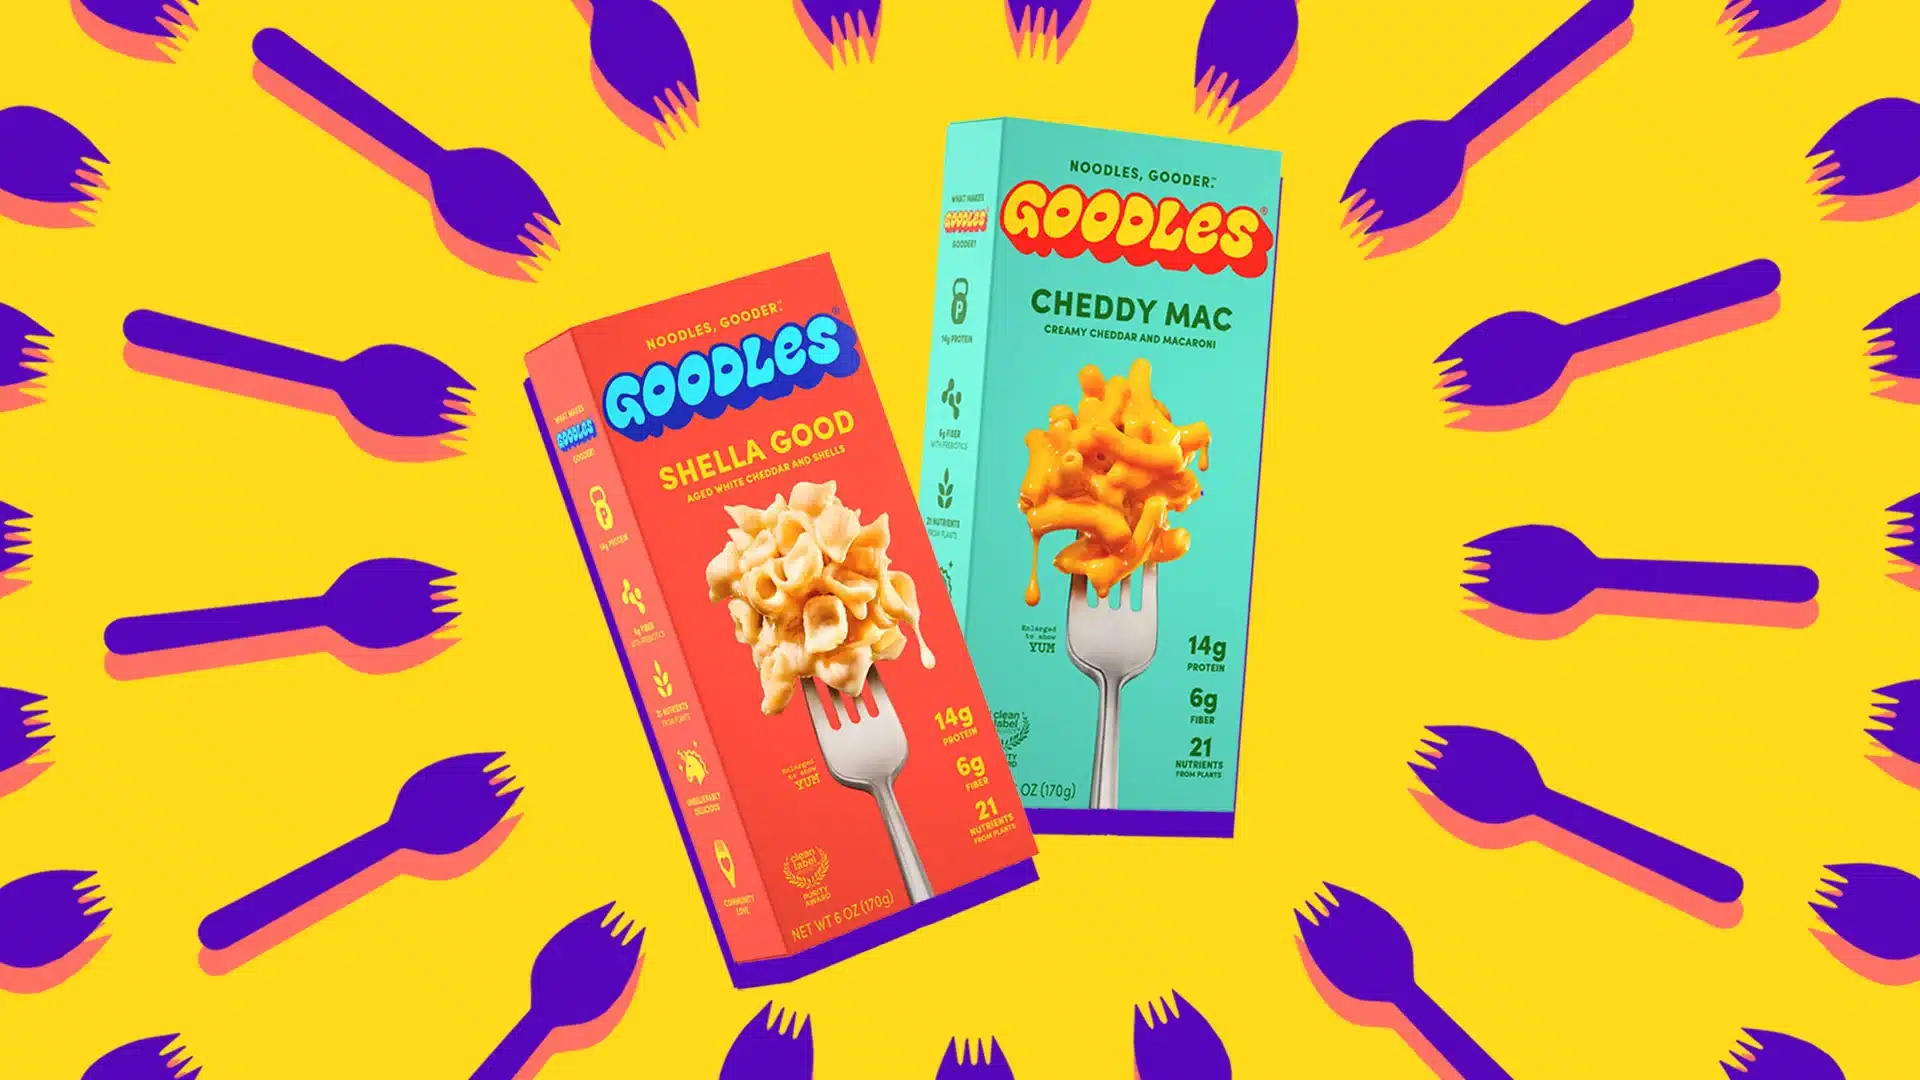 GOODLES® Raises $13M in Series A Funding Round Led by Leading Consumer-Focused Investment Firm, L Catterton